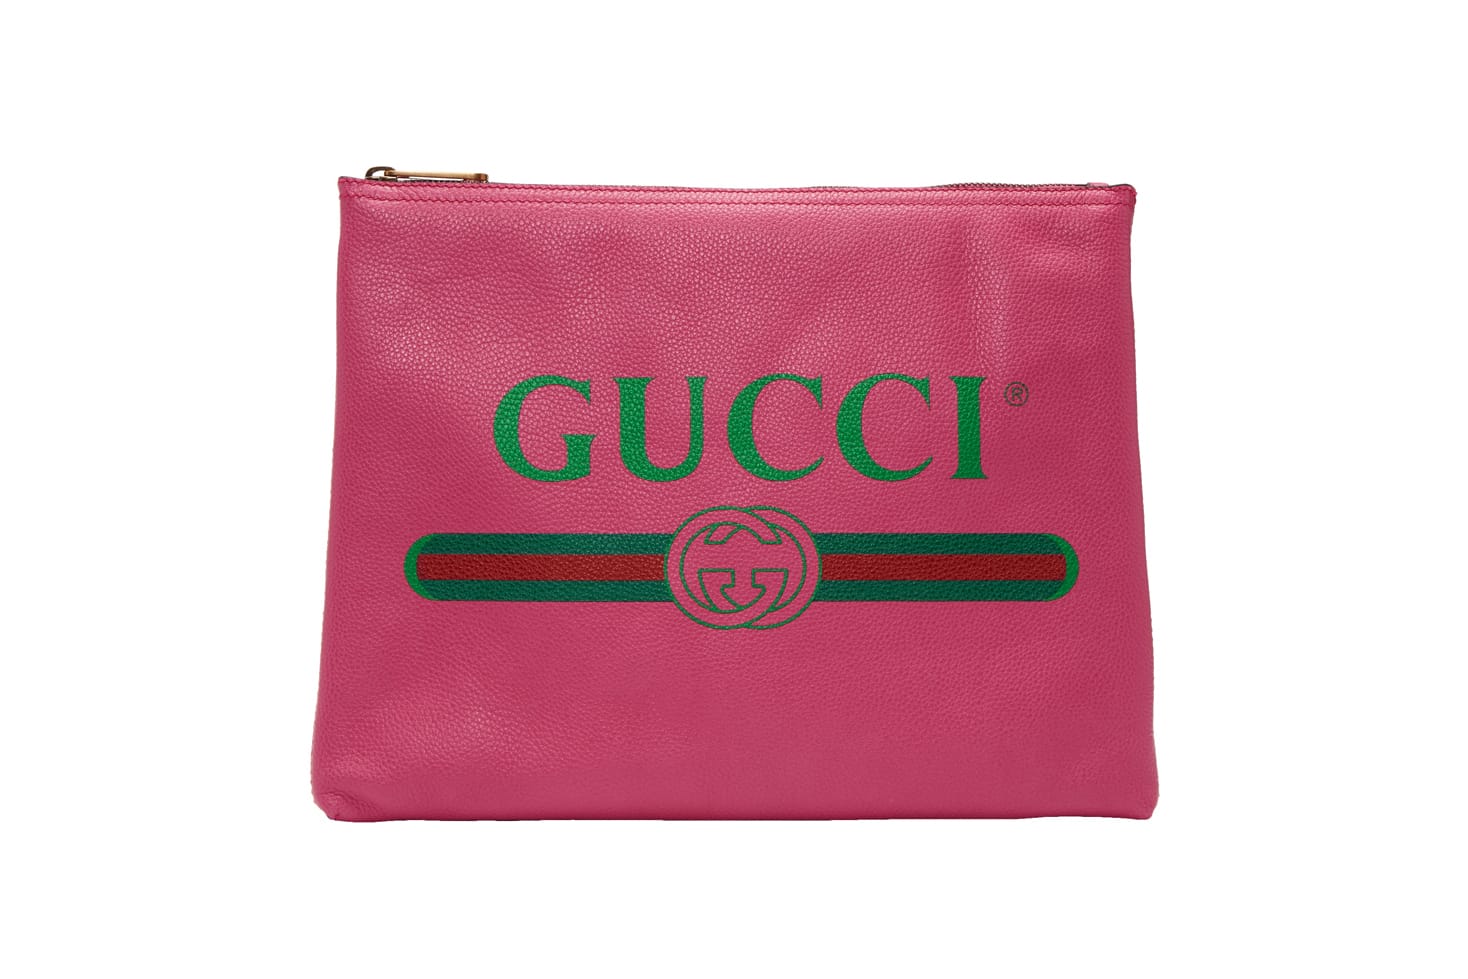 Gucci's Vintage Logo Leather Pouch in 